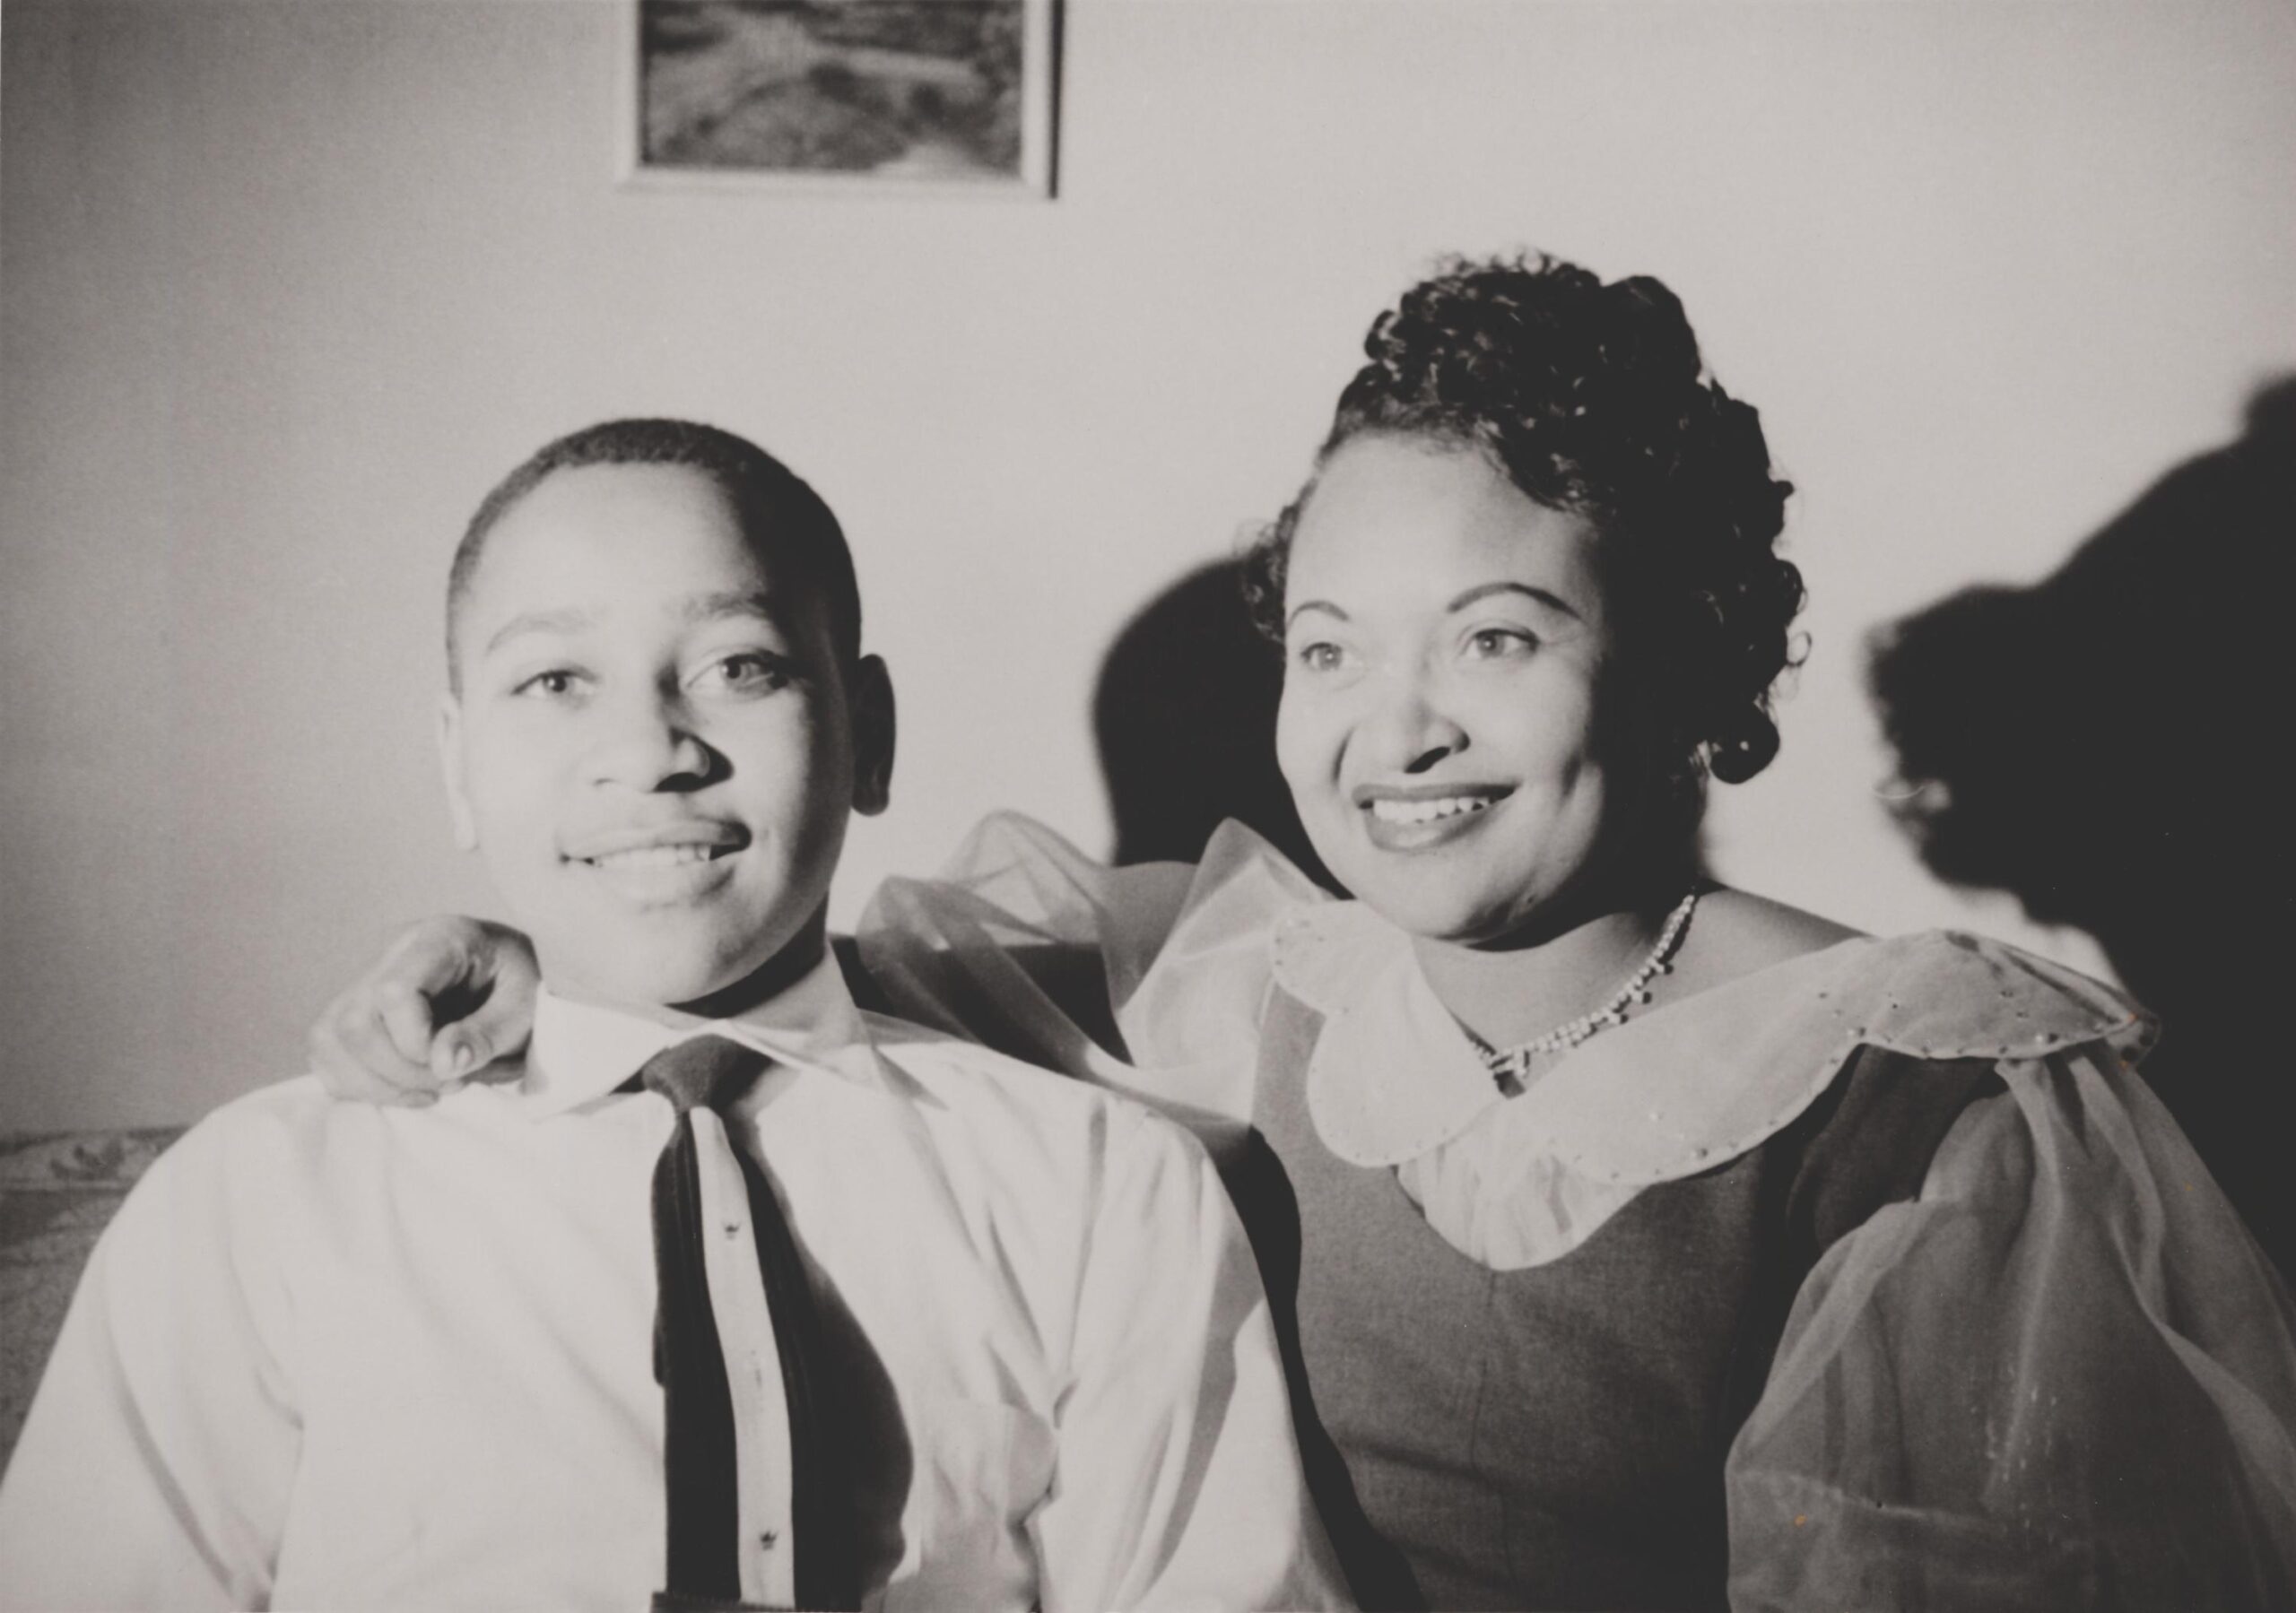 Emmett Till with his mother, Mamie Bradley, ca. 1950. To expose the horror of her 14 year-old's lynching, she ordered an open coffin funeral to show his tortured and mutilated body. (Image: Everett Collection Historical / Alamy)